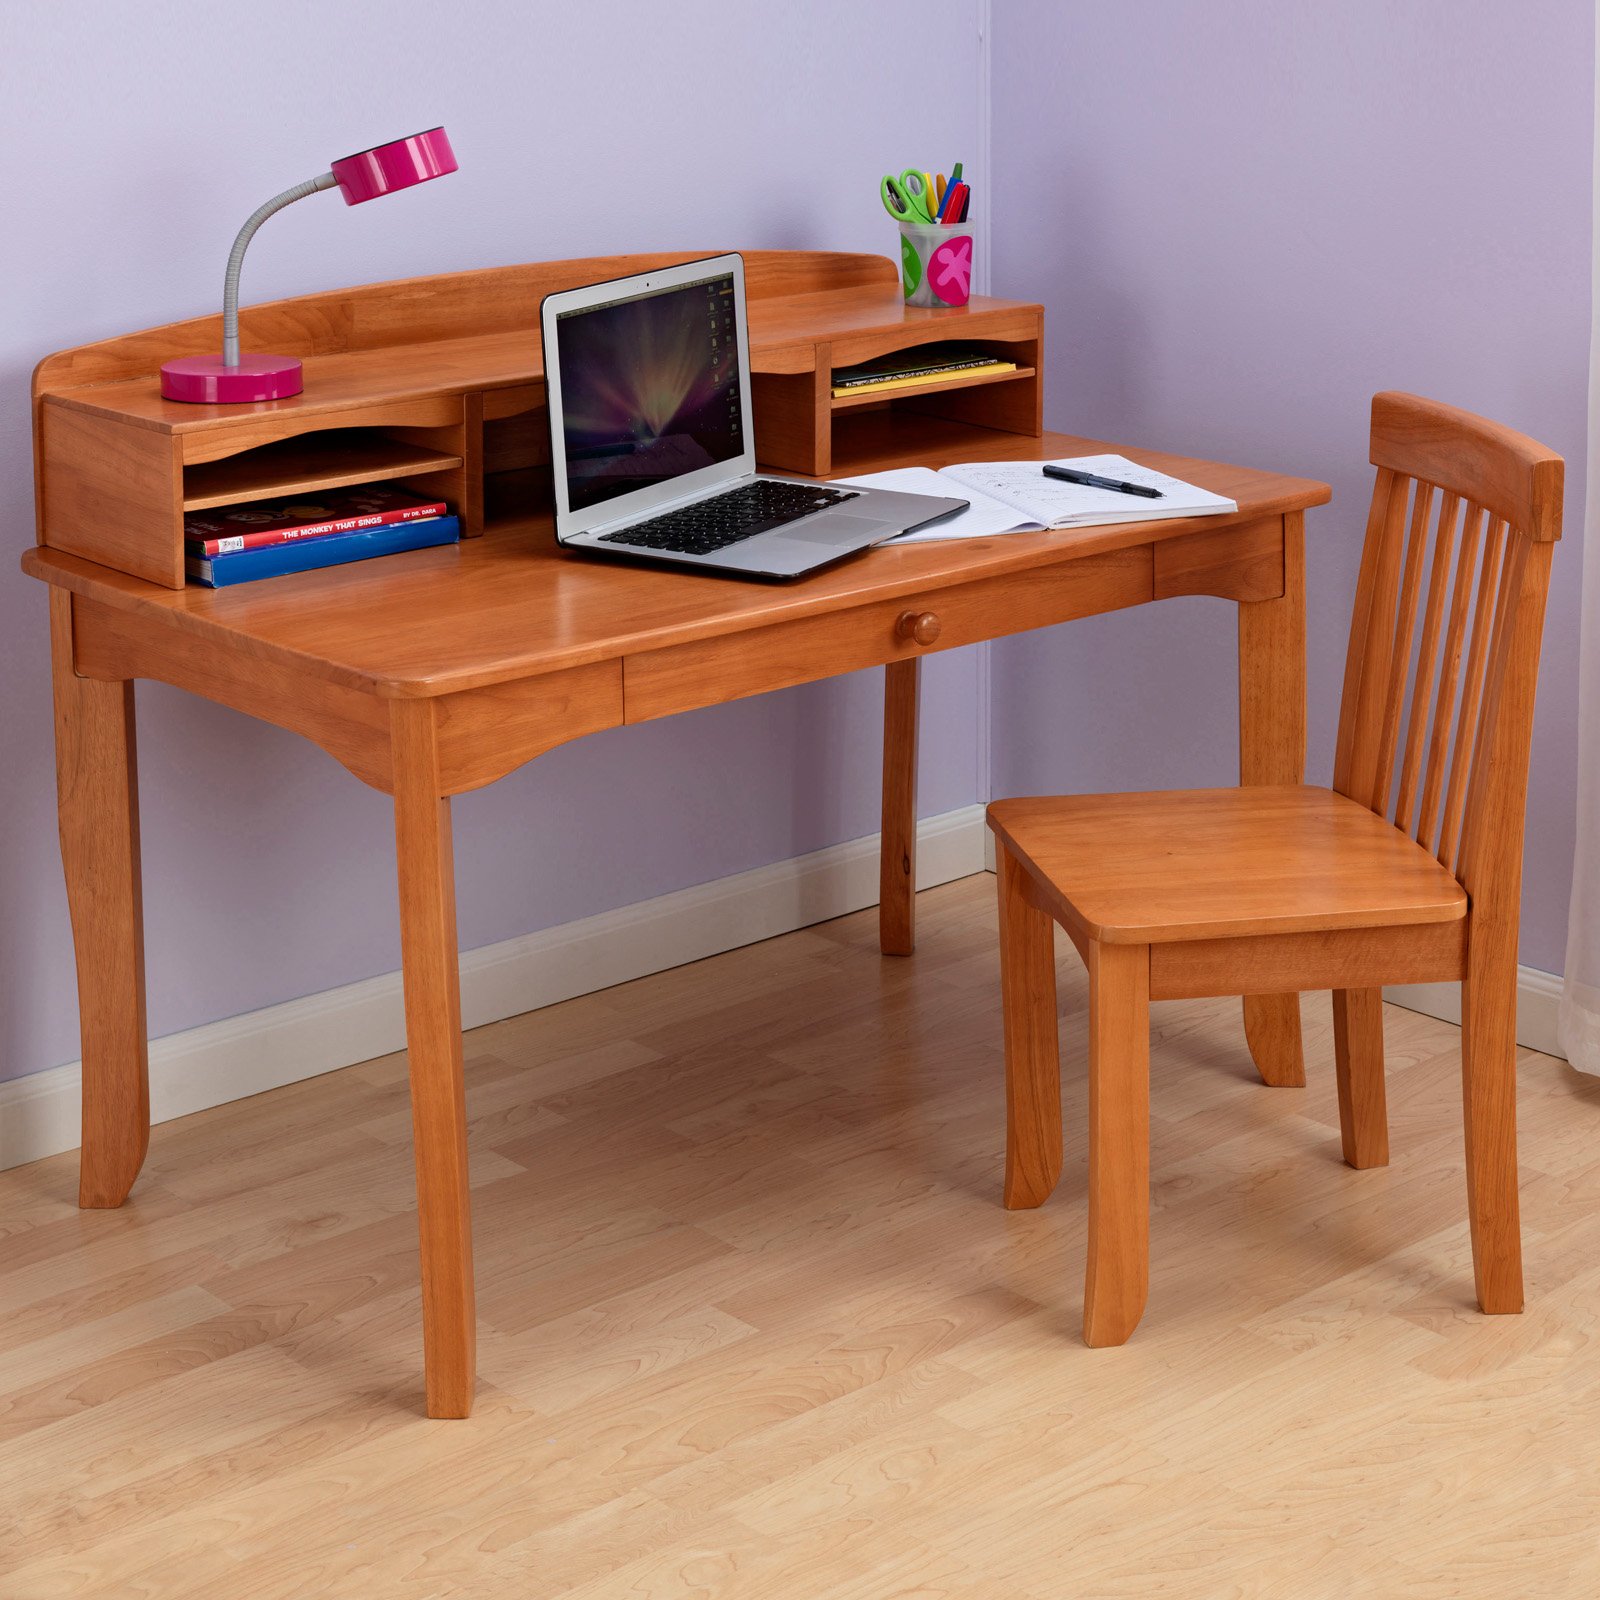 Best Study Table Designs For Students Punkie